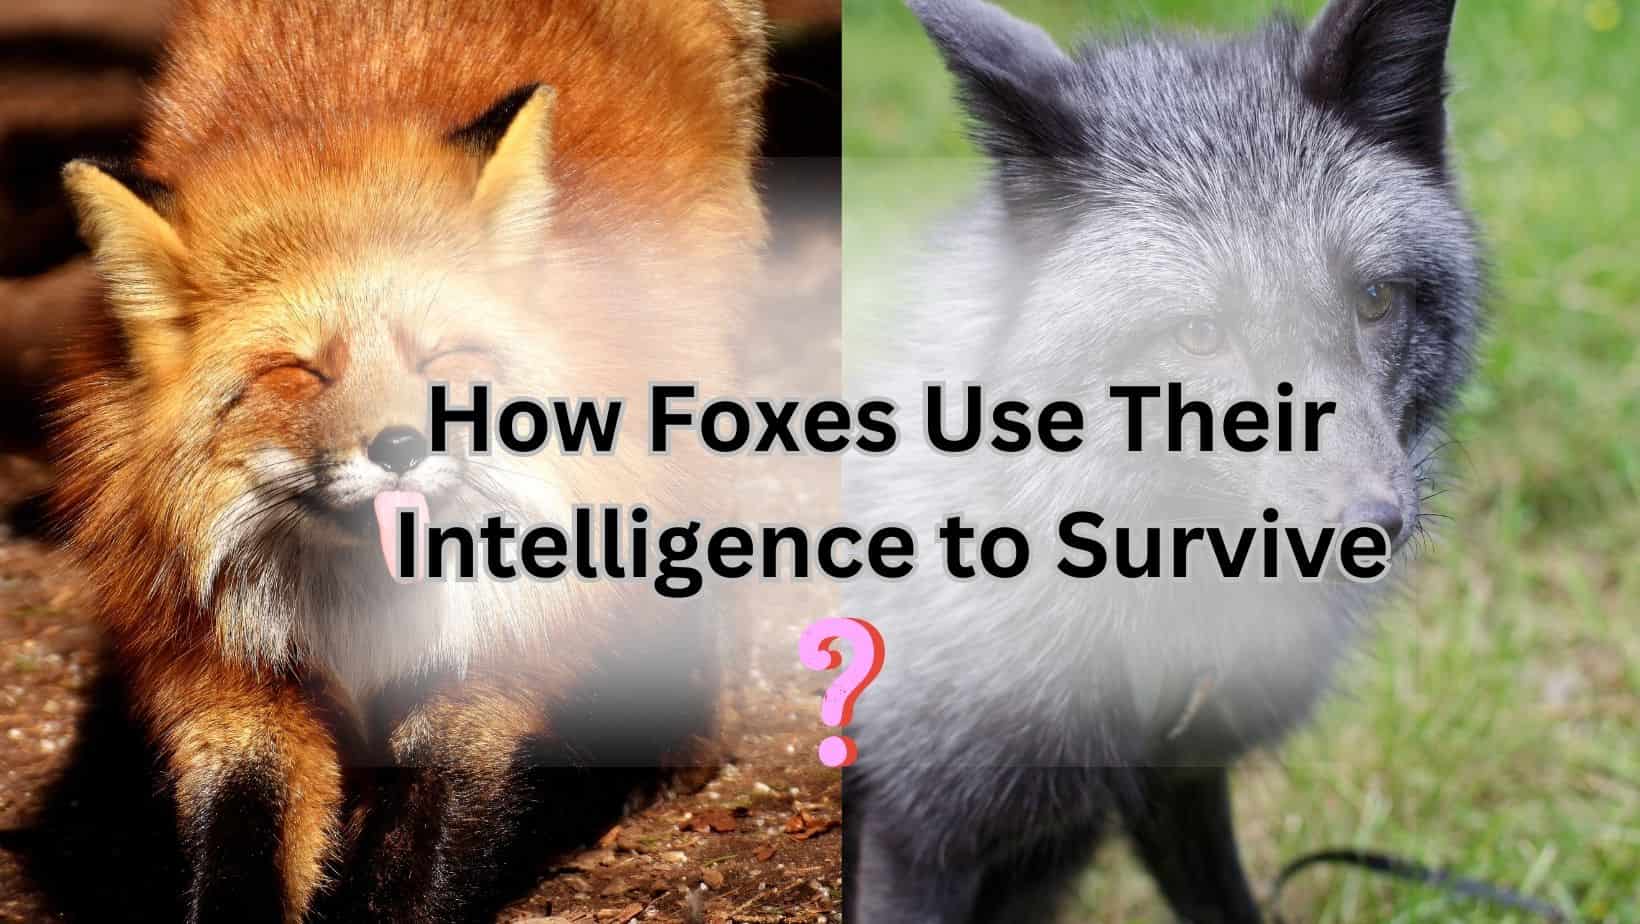 how smart is a fox